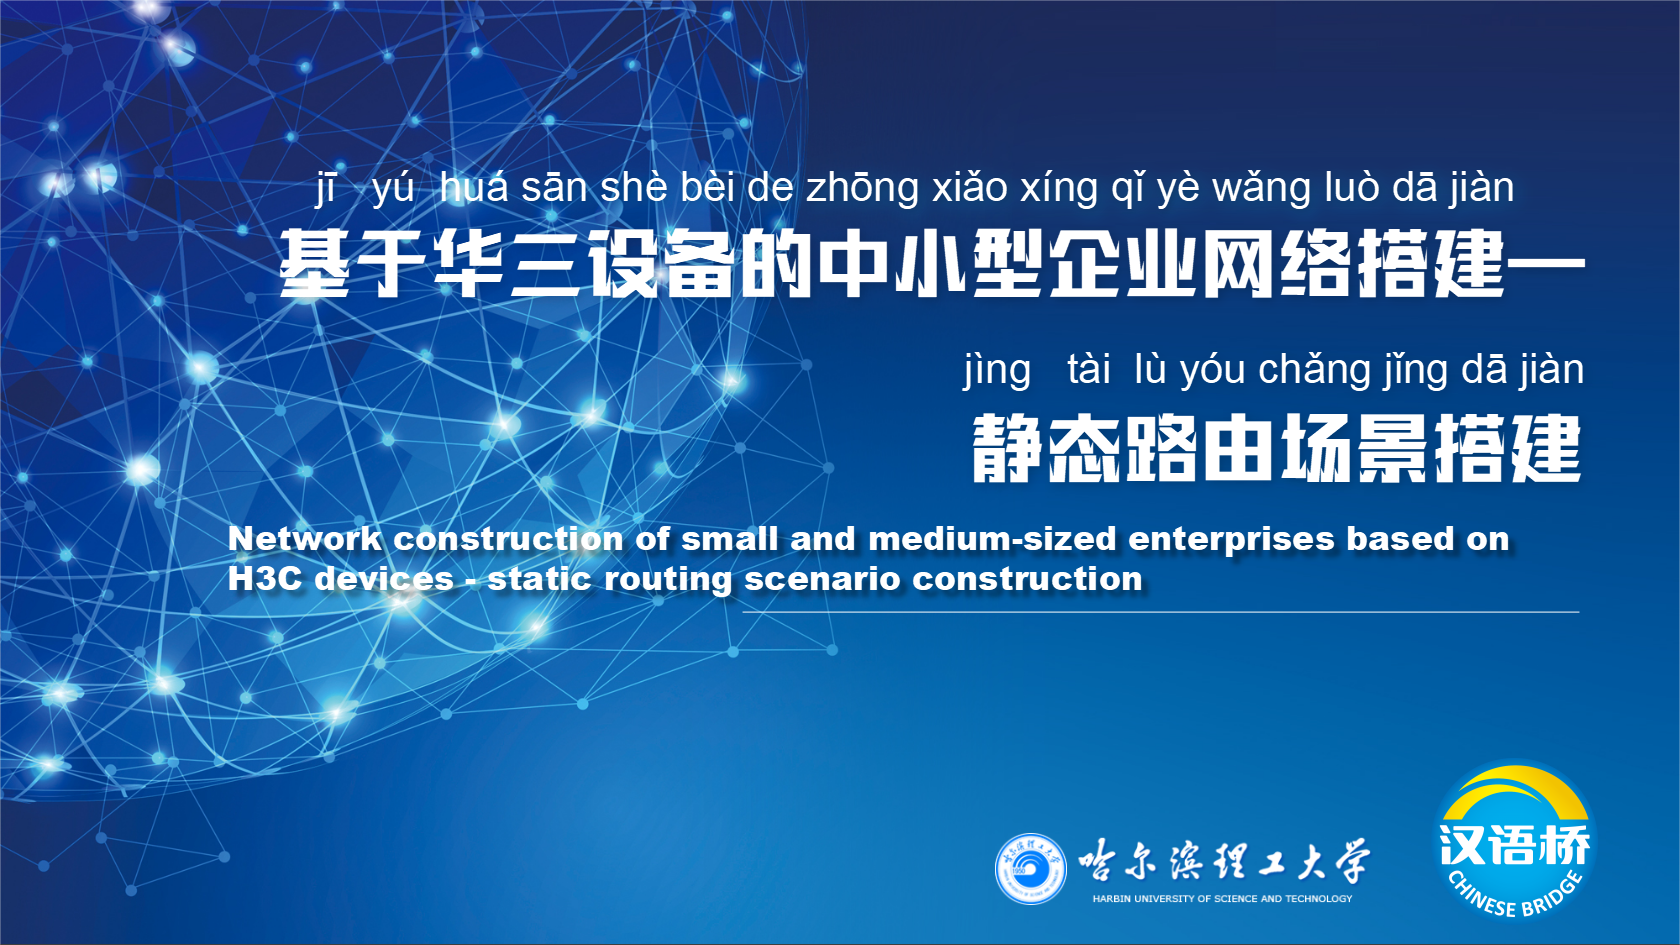 Network construction of small and medium-sized enterprises based on H3C devices - Static routing scenario construction